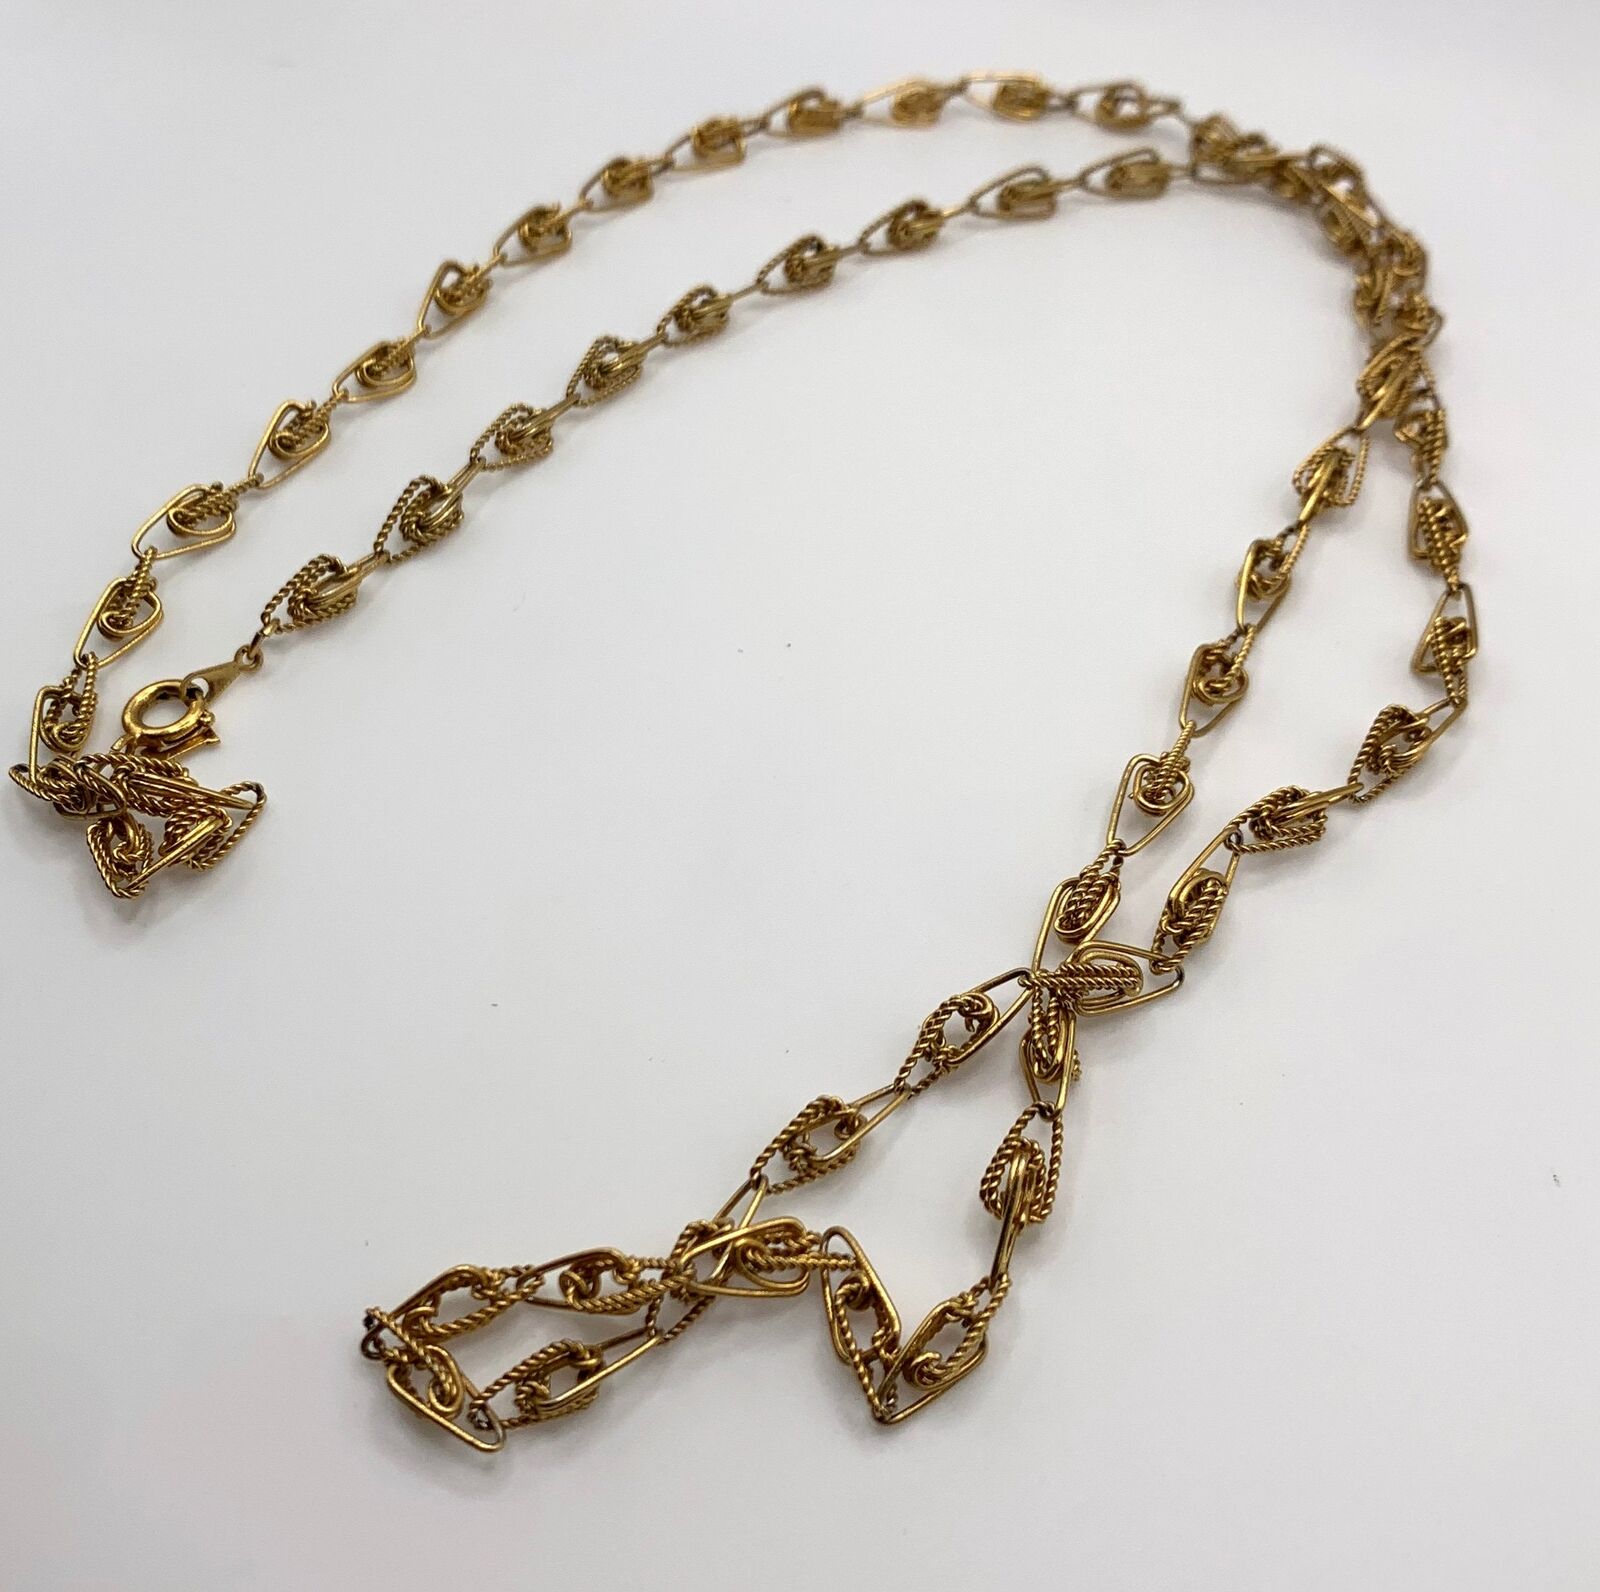 Vintage Trifari Fancy link dainty gold tone chain necklace 30 inch length